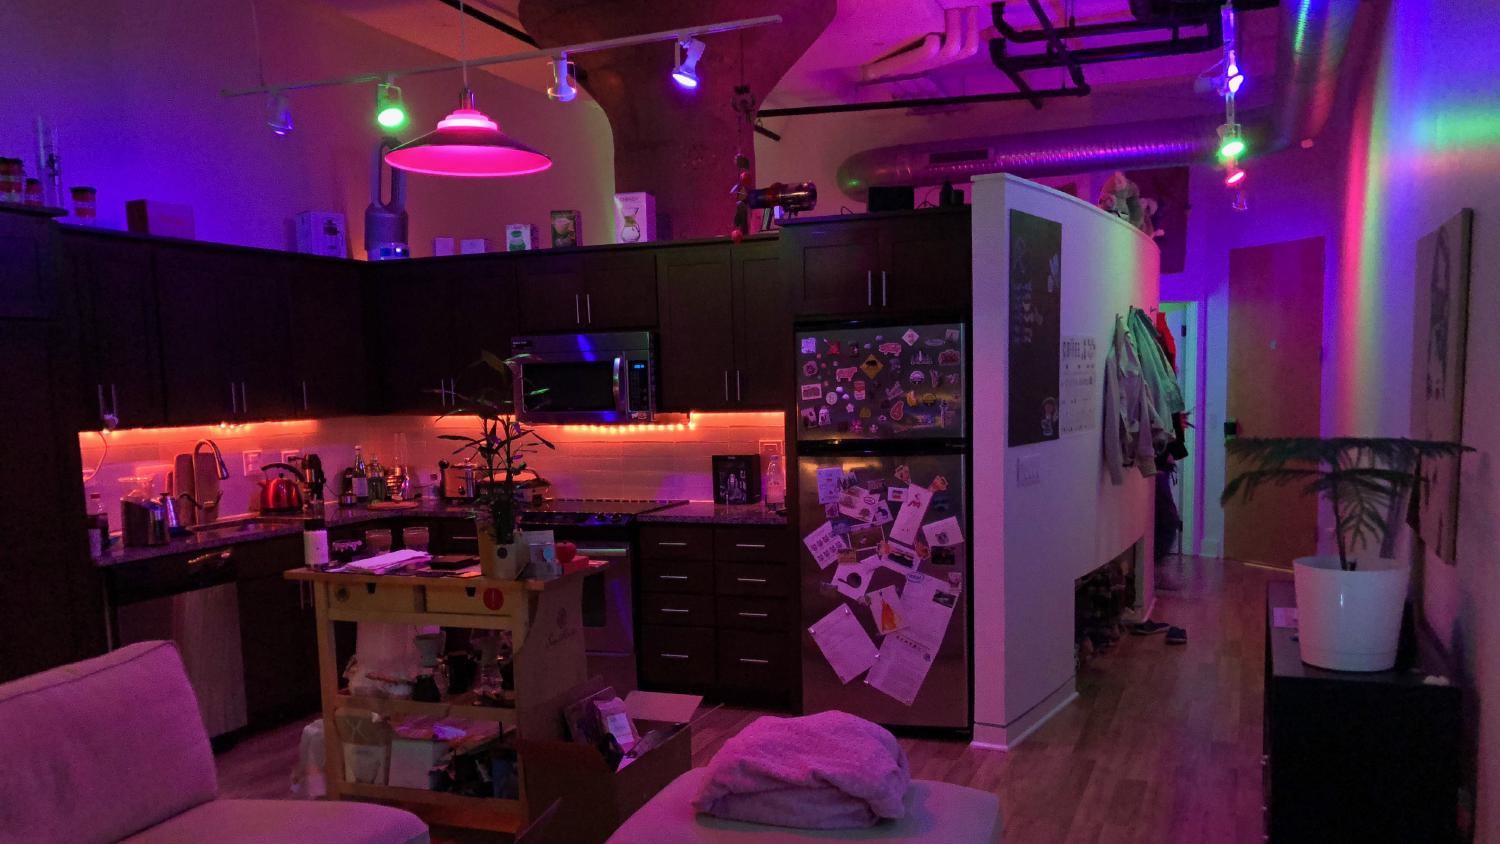 Syncing lights to music looks especially impressive in a loft setting